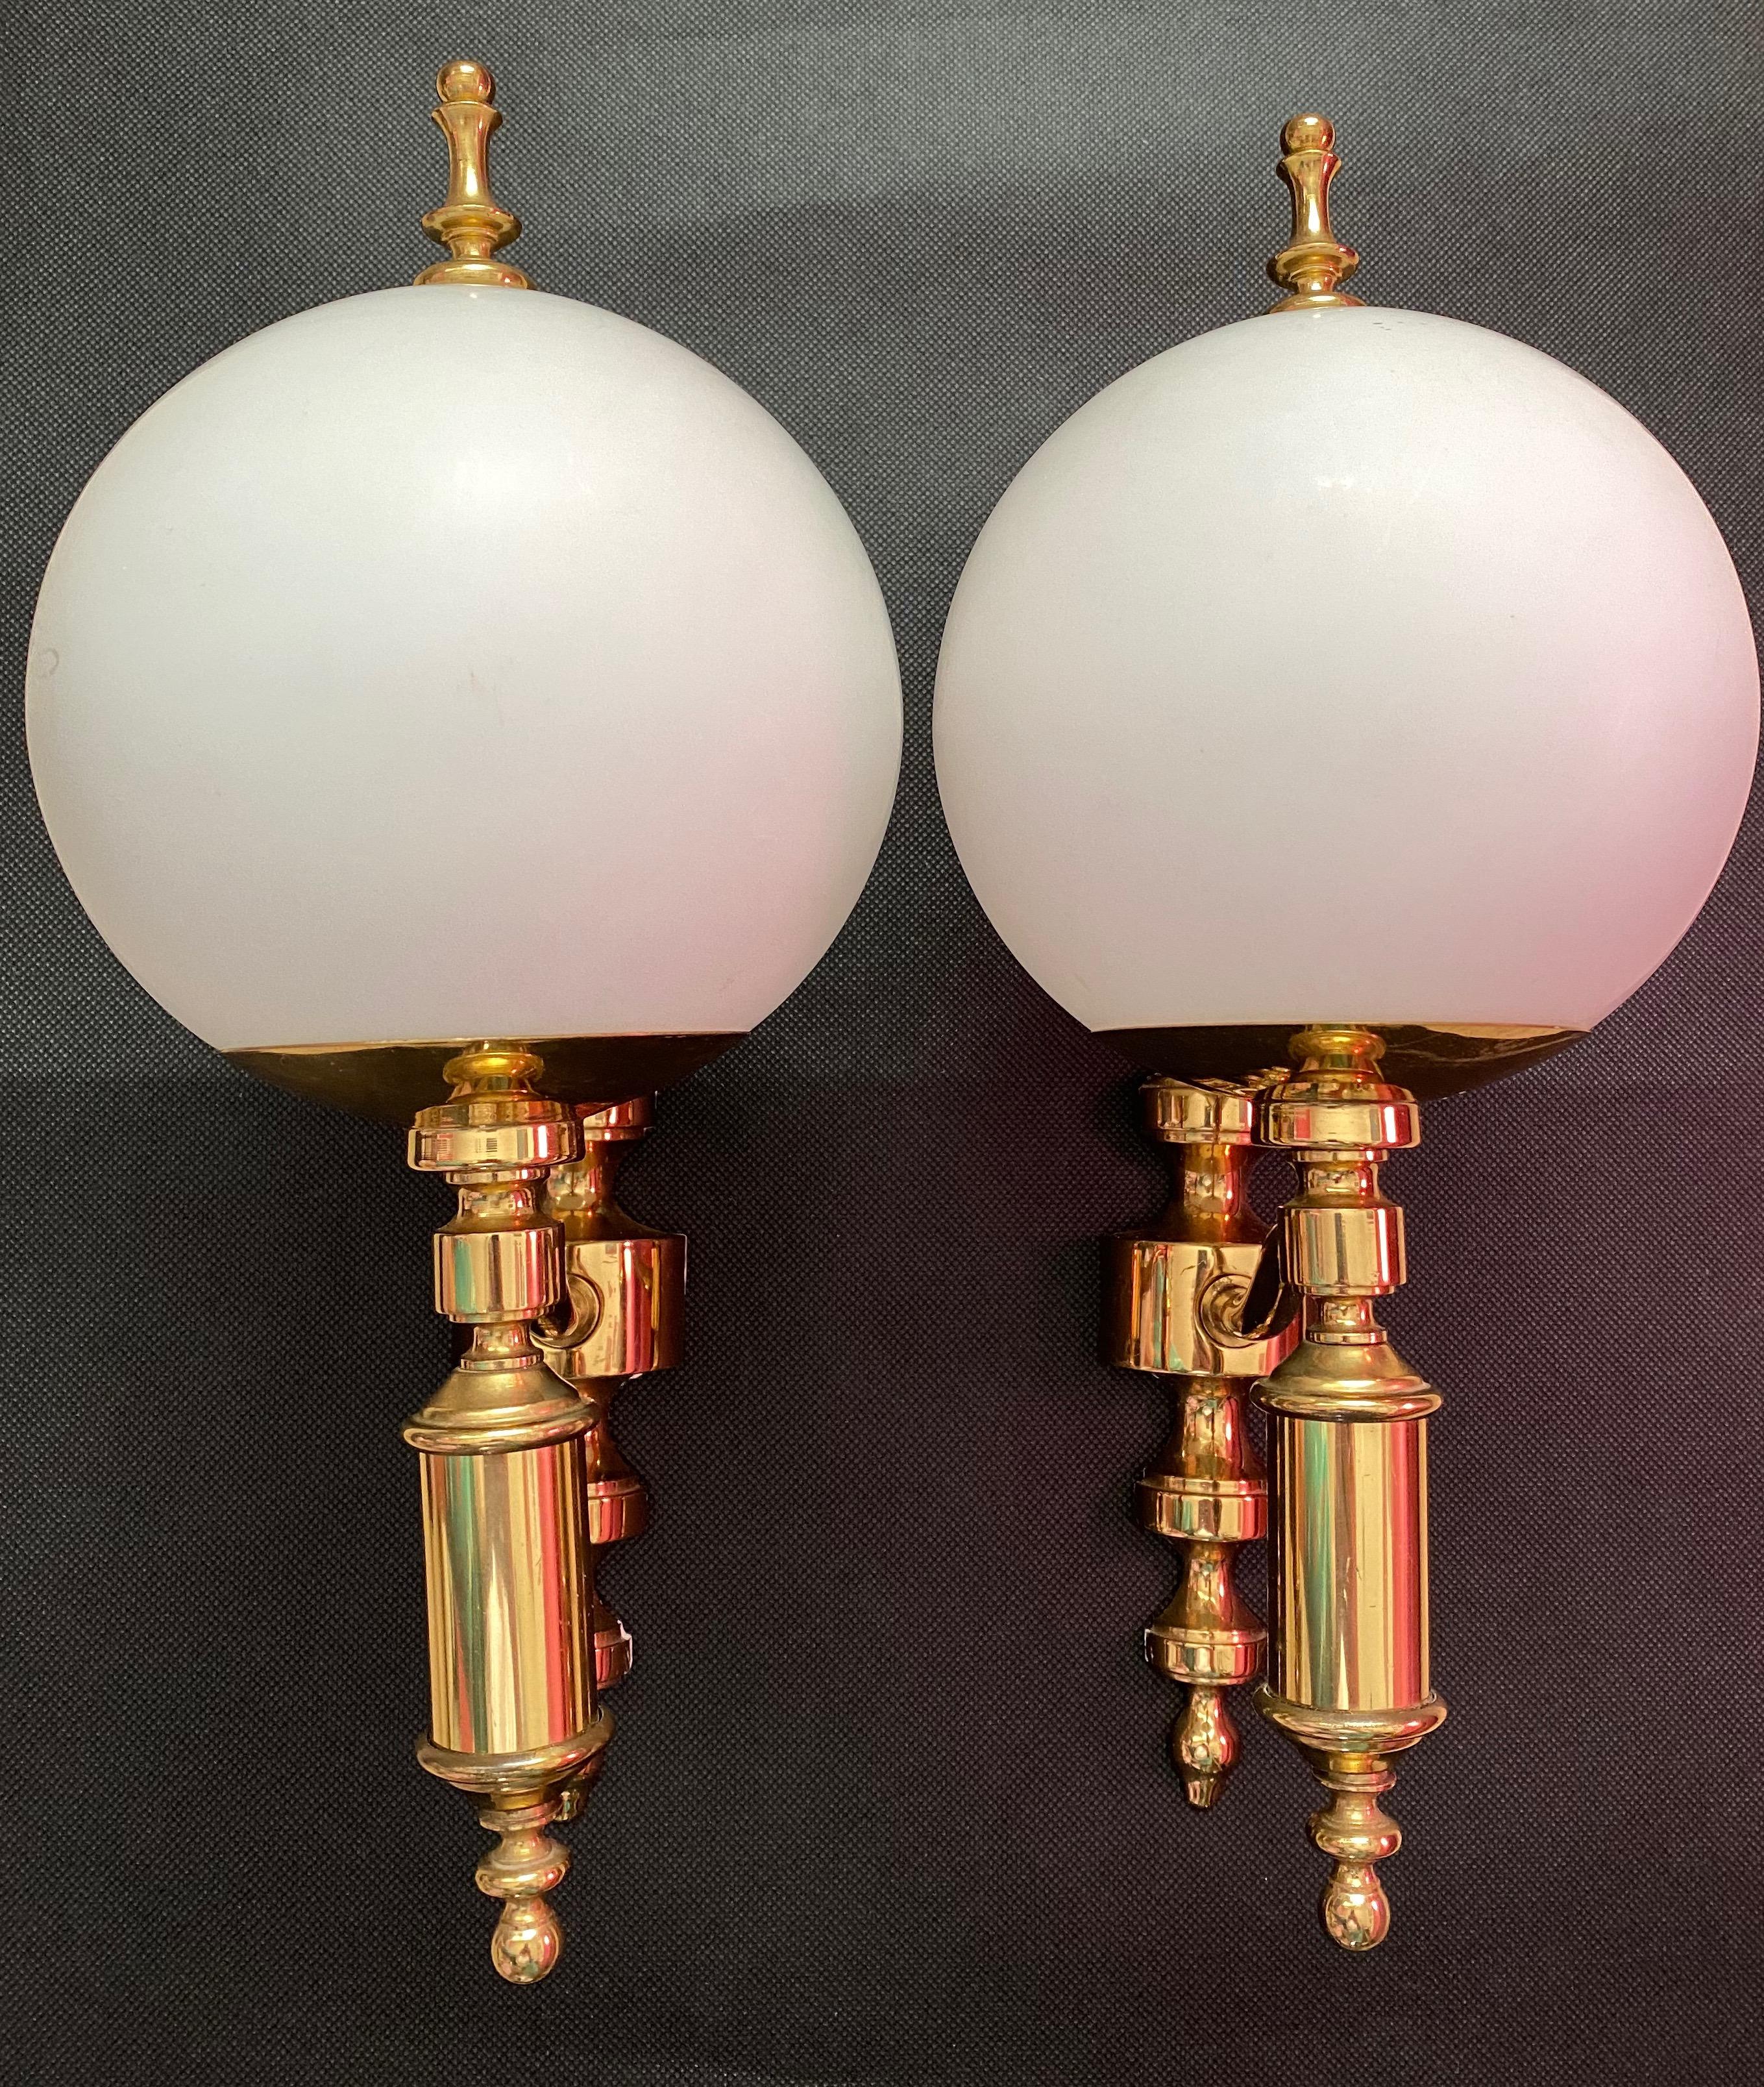 Pair of Art Deco style brass and milk glass sconces made by Soelken Leuchten, Germany, each fixture requires a European E14 candelabra bulb, up to 60 watts. The wall lights have a beautiful brass frame and give each room a eclectic statement.